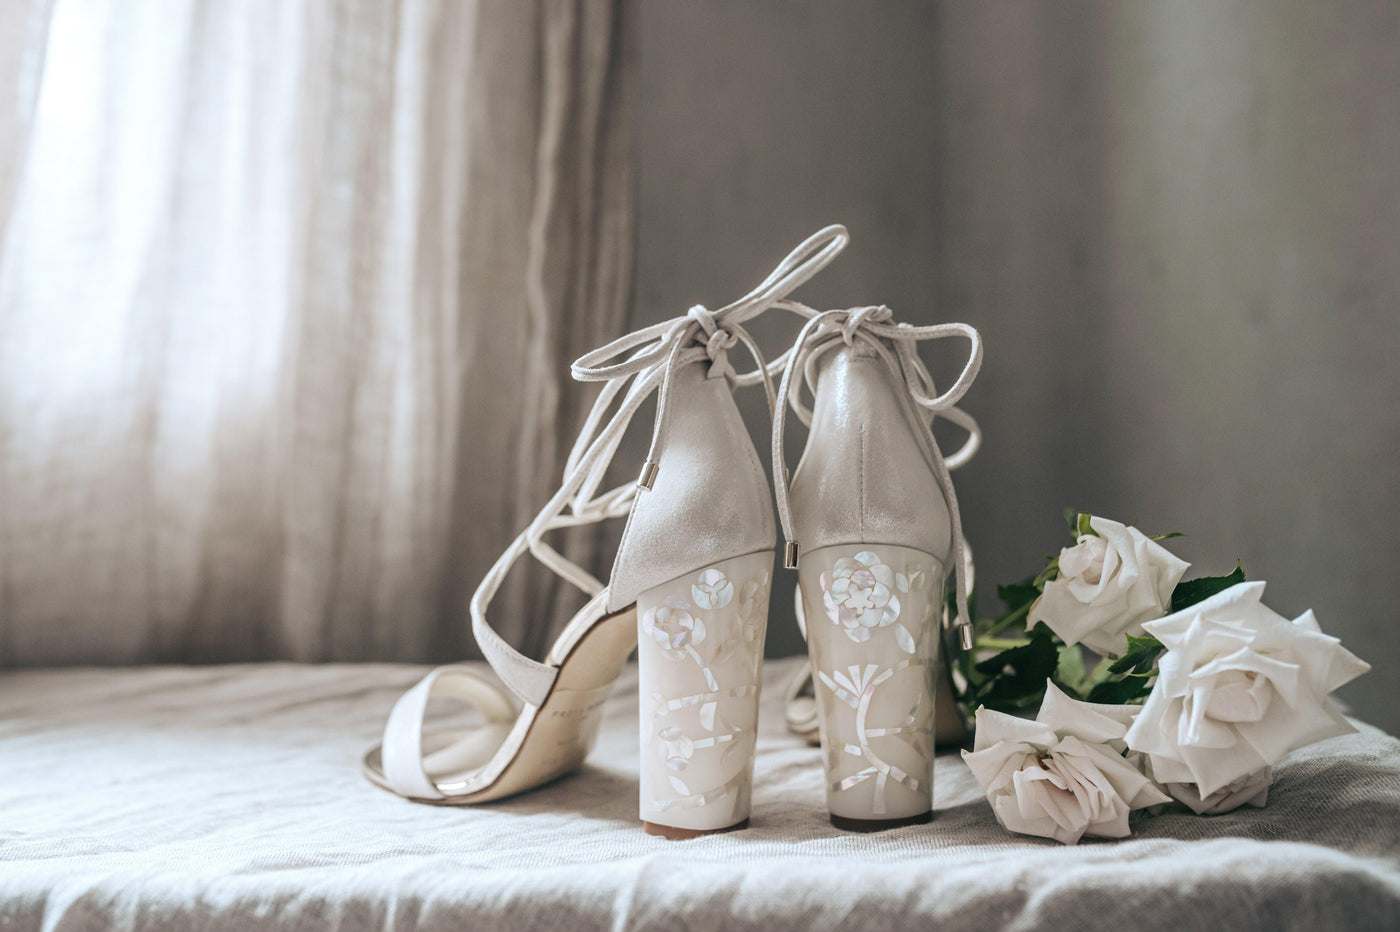 How To Match Your Wedding Shoes With Your Dress: Tips For UK Brides